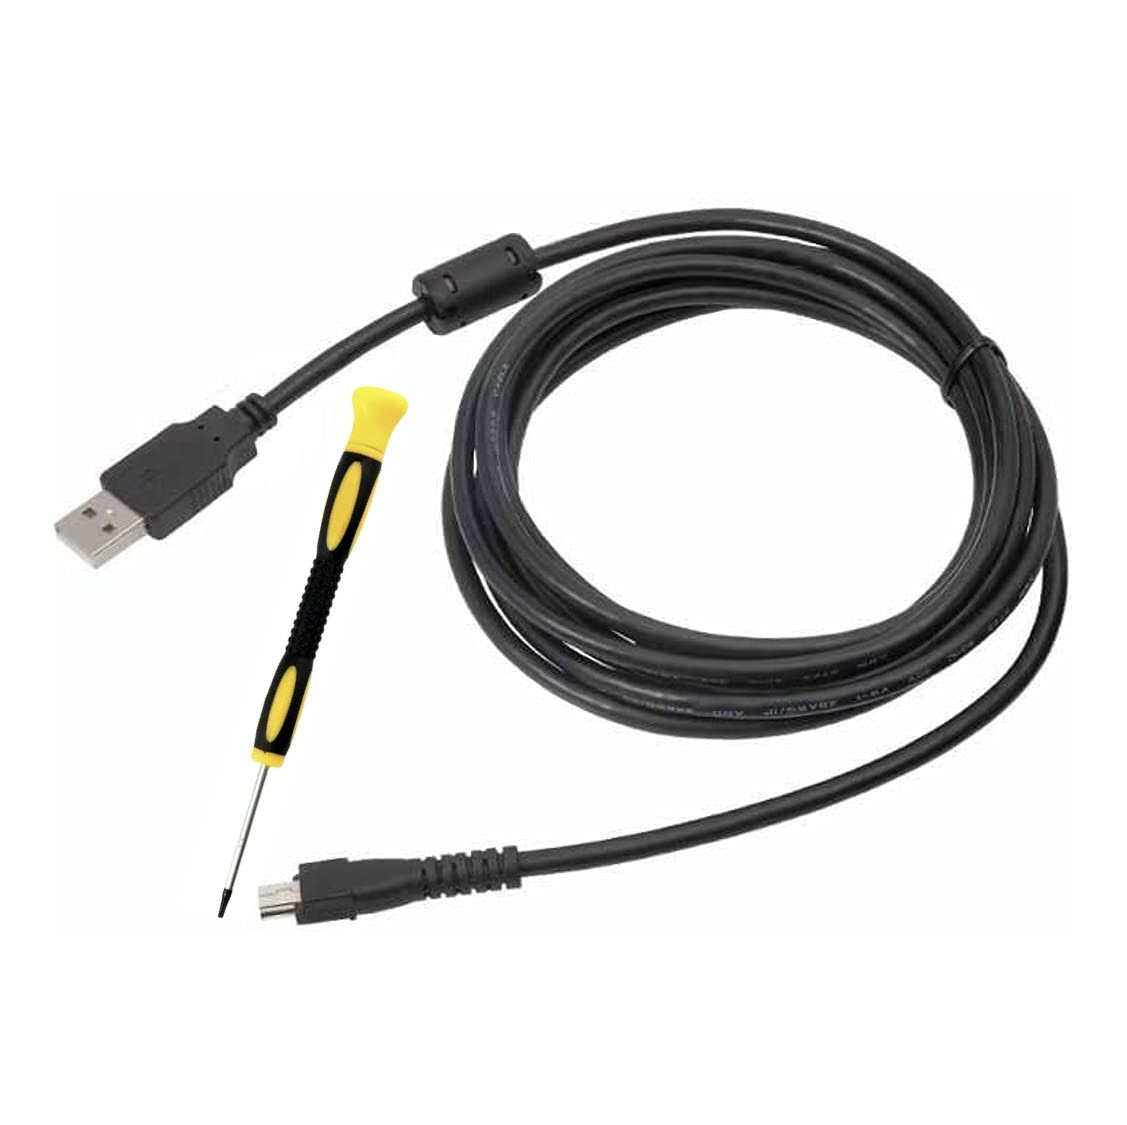 DictationOne 382474 Replacement 8 ft. USB Cord Cable Kit for PowerMic 4